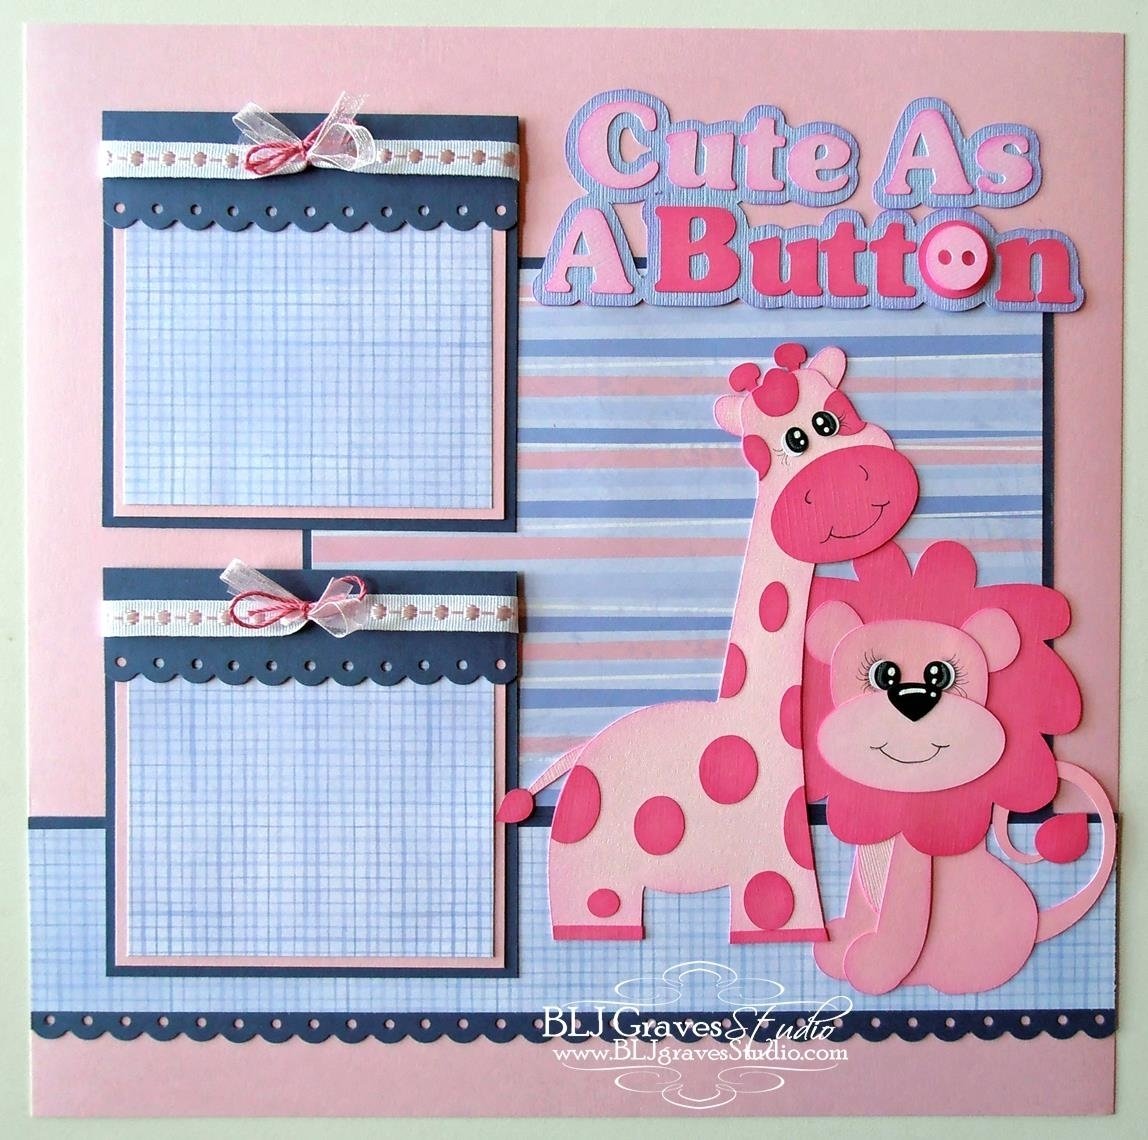 10 Trendy Scrapbooking Ideas For Baby Girl new cute scrapbook ideas for baby girl gallery scrapbook ideas 2018 2022